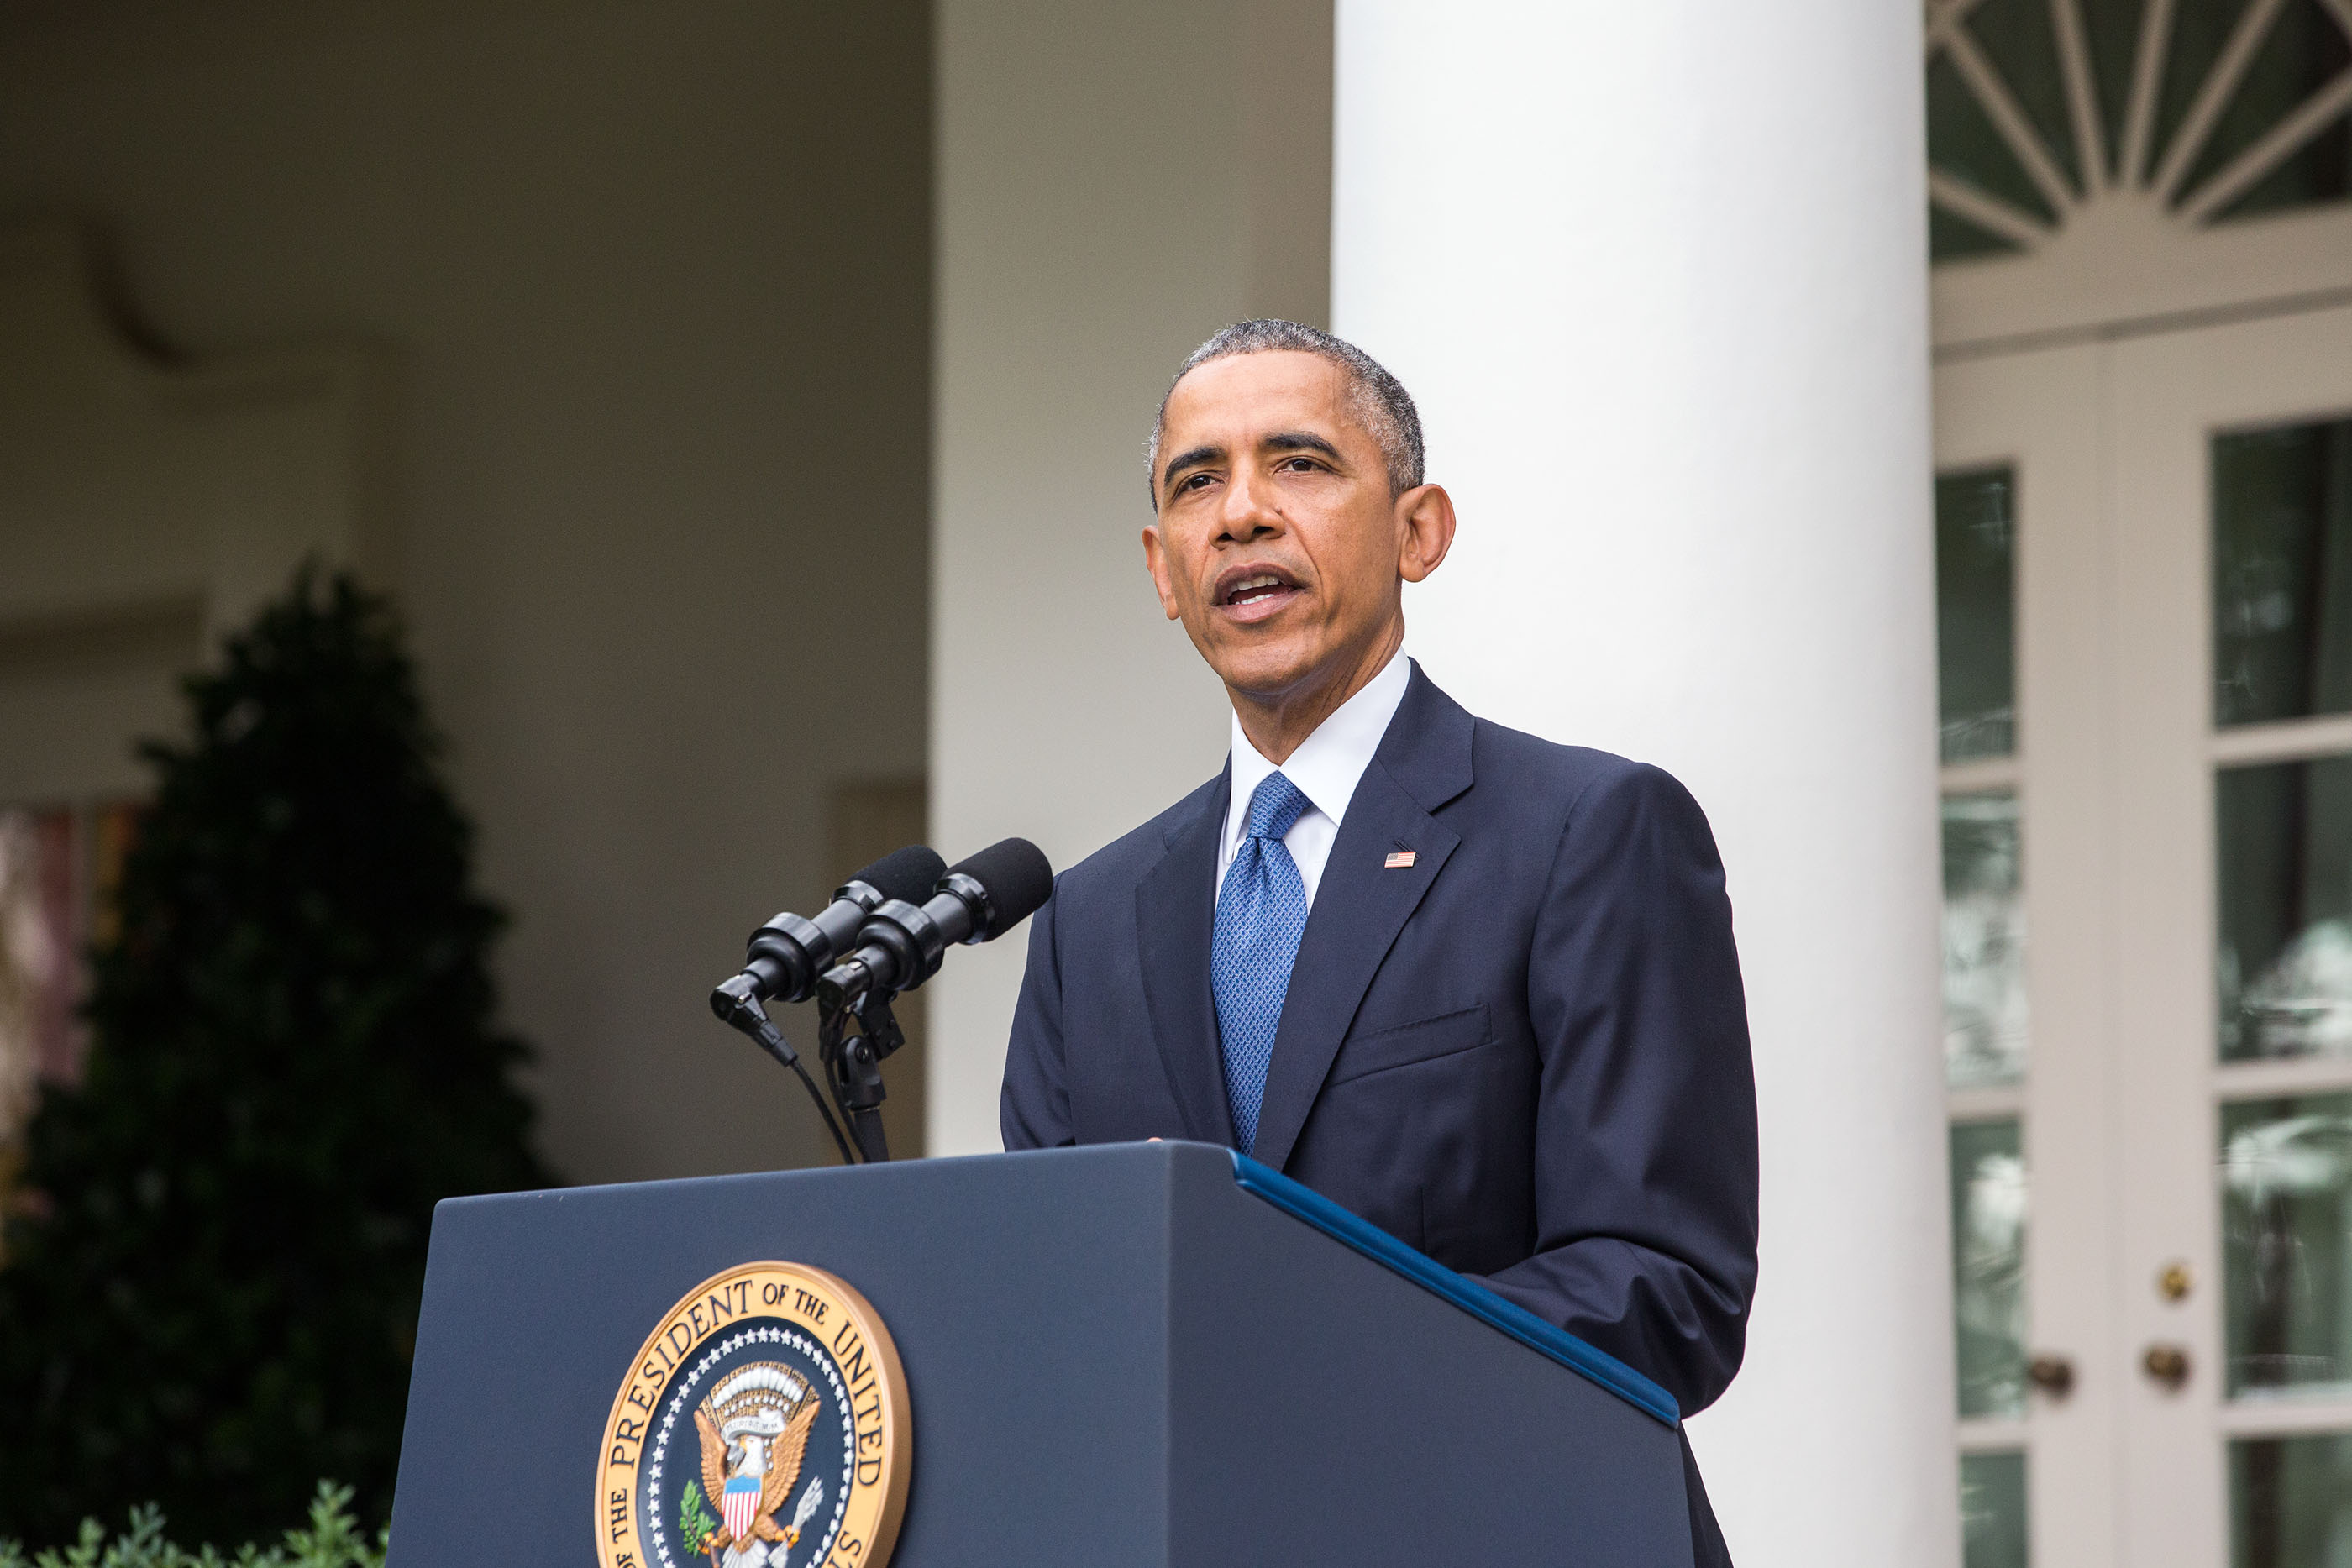 President Obama delivers a statement regarding the Supreme Court ruling on same-sex marriage